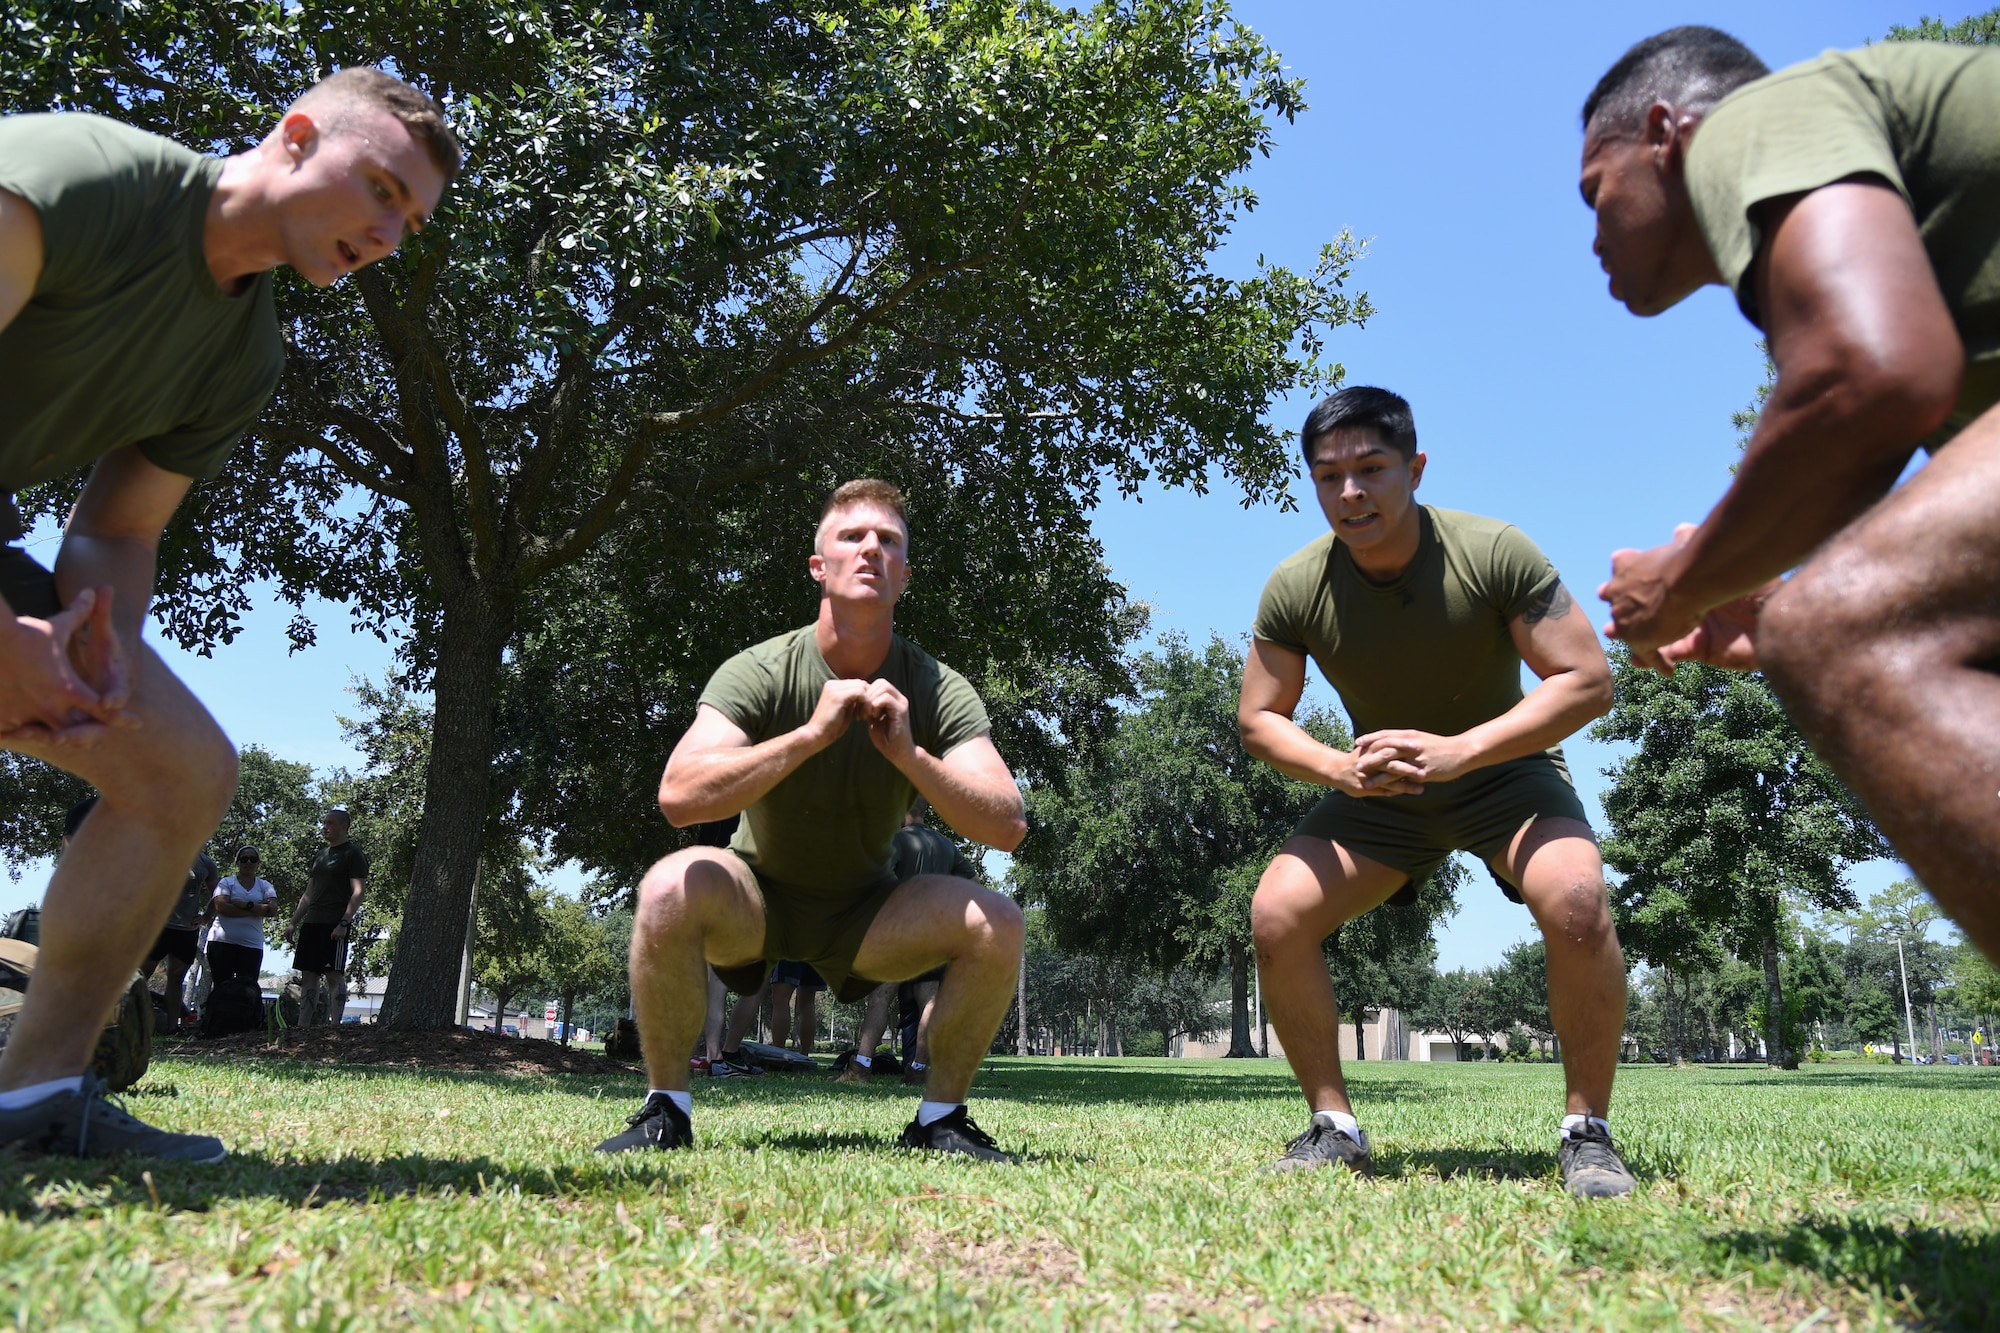 Members of the Keesler Marine Detachment team participate in the air squats portion of the 81st Security Forces Squadron Defender's Challenge Ruck near the Crotwell Track on Keesler Air Force Base, Mississippi, Aug. 16, 2019. The competition, consisting of 11 four-person teams, completing seven obstacles, was one of several events in recognition of The Year of the Defender. (U.S. Air Force photo by Kemberly Groue)